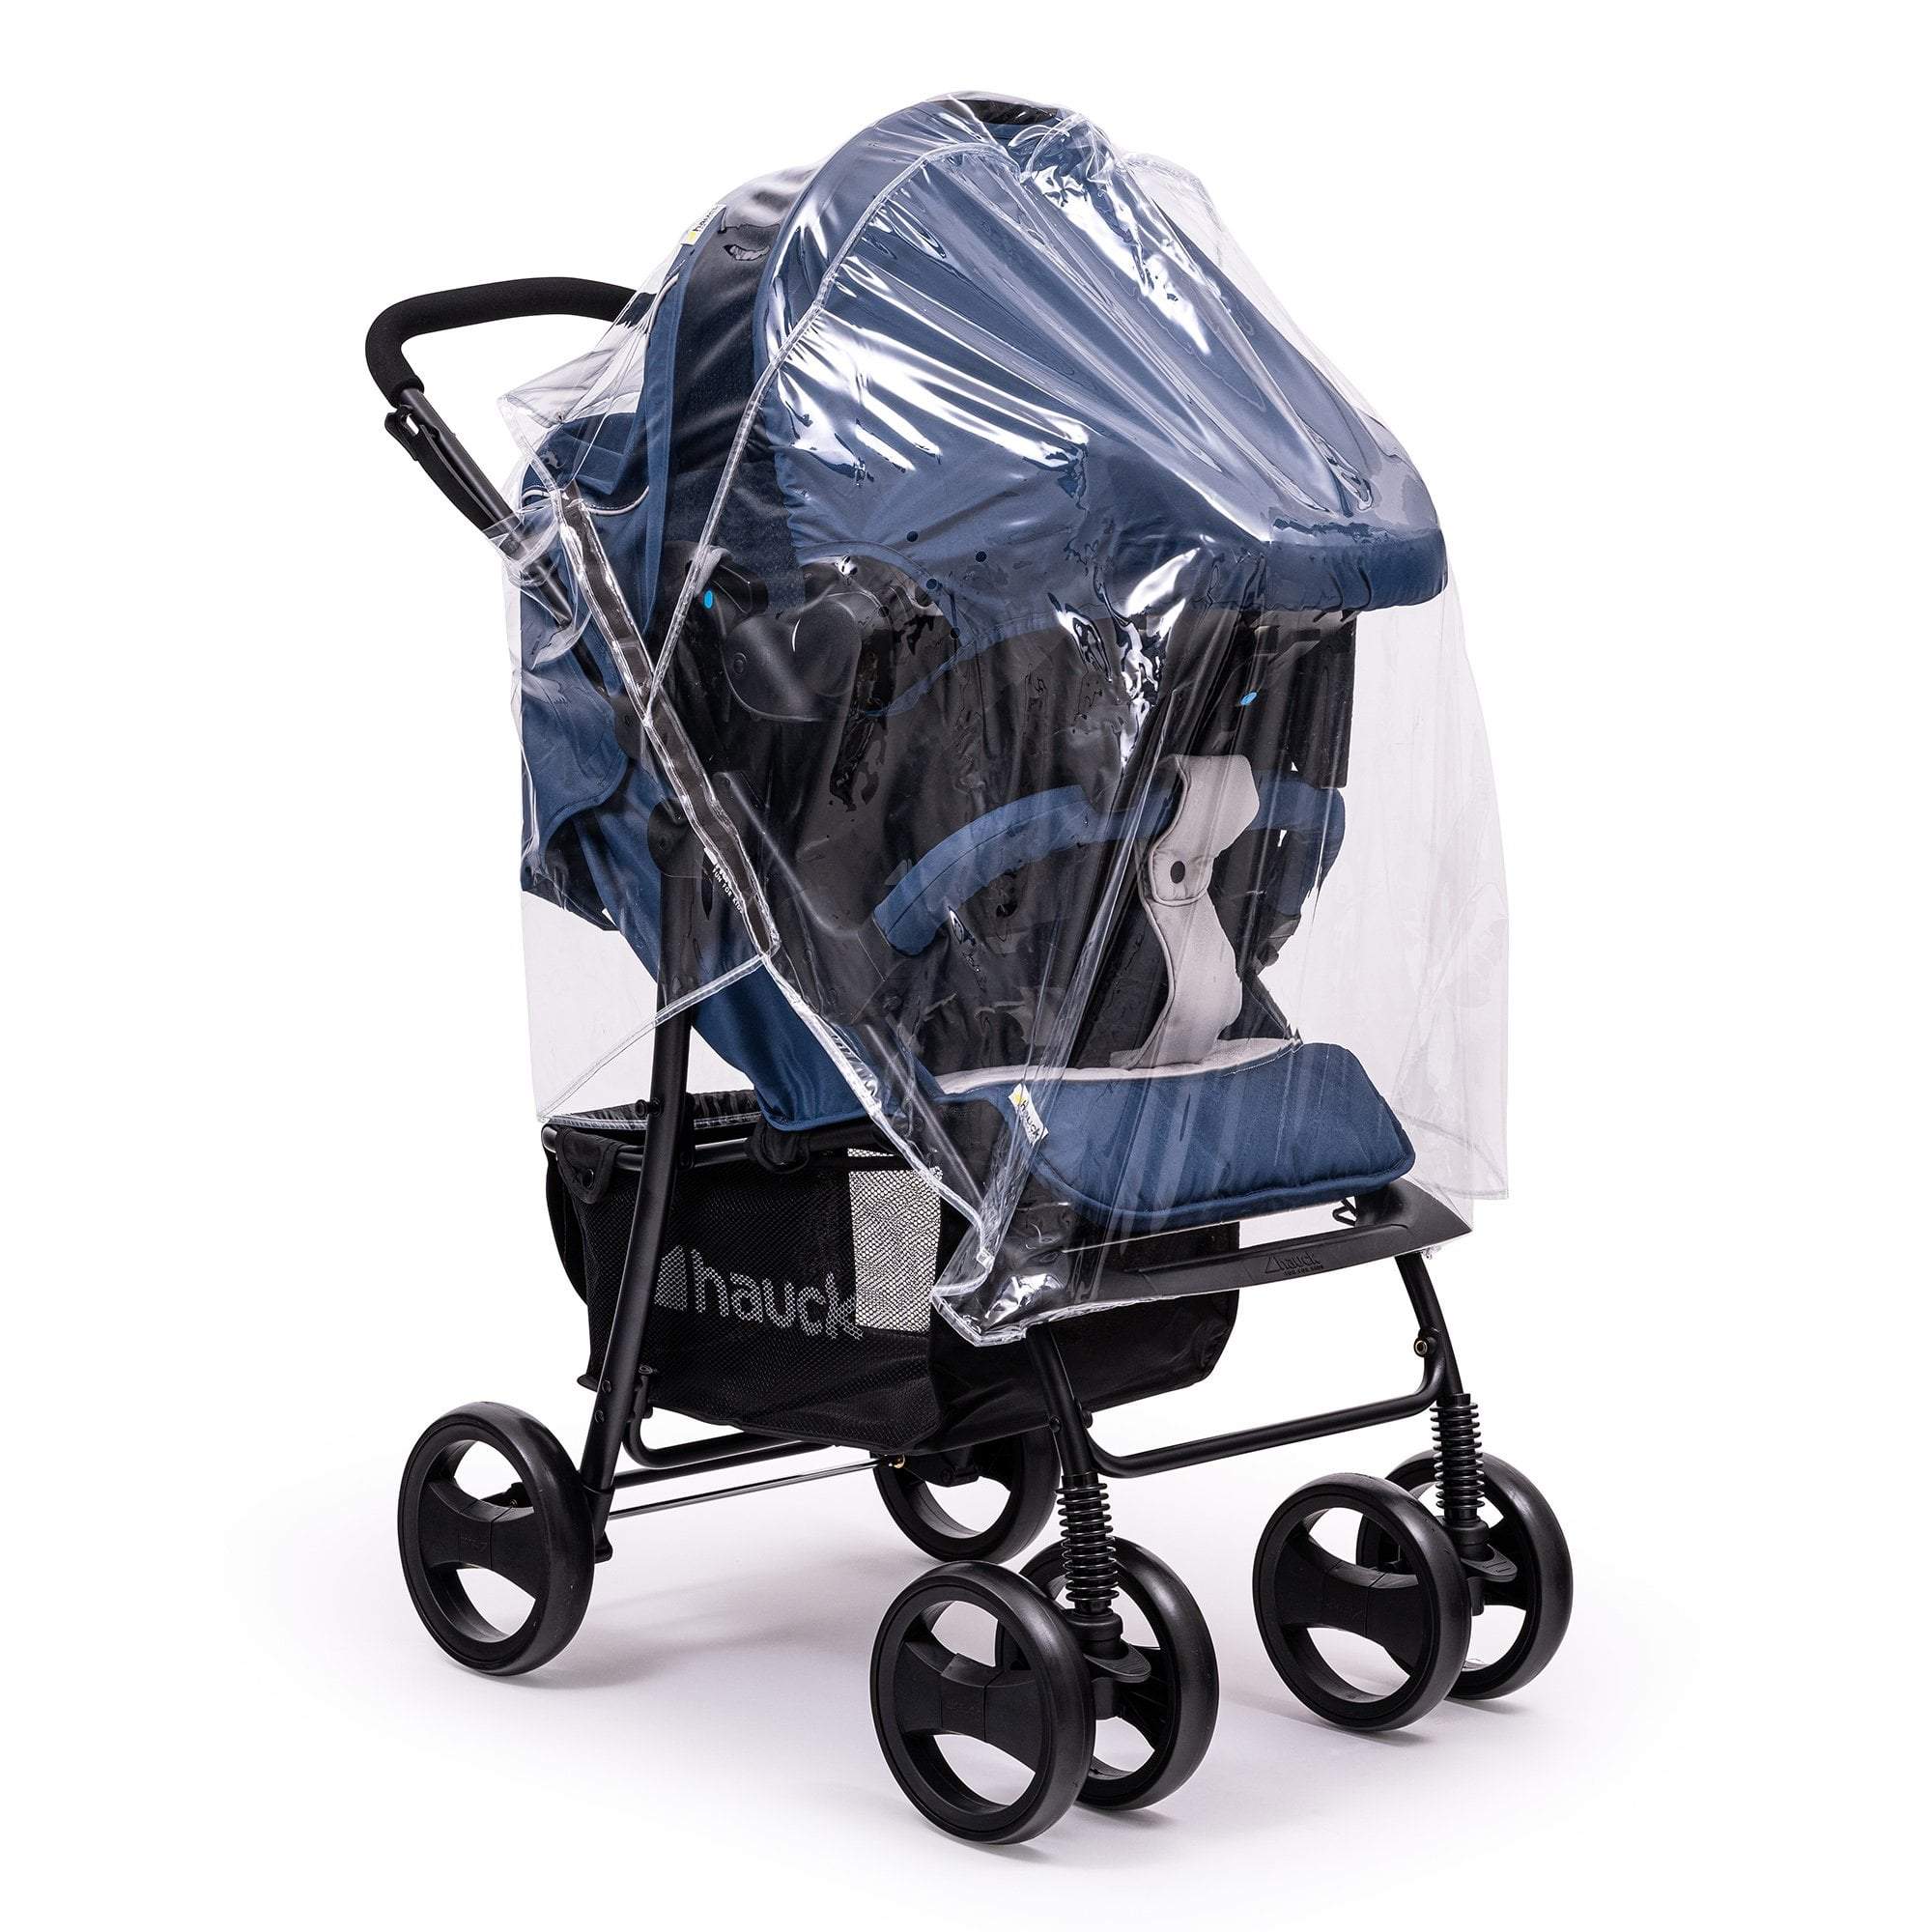 Travel System Raincover Compatible with Kiddy - Fits All Models -  | For Your Little One